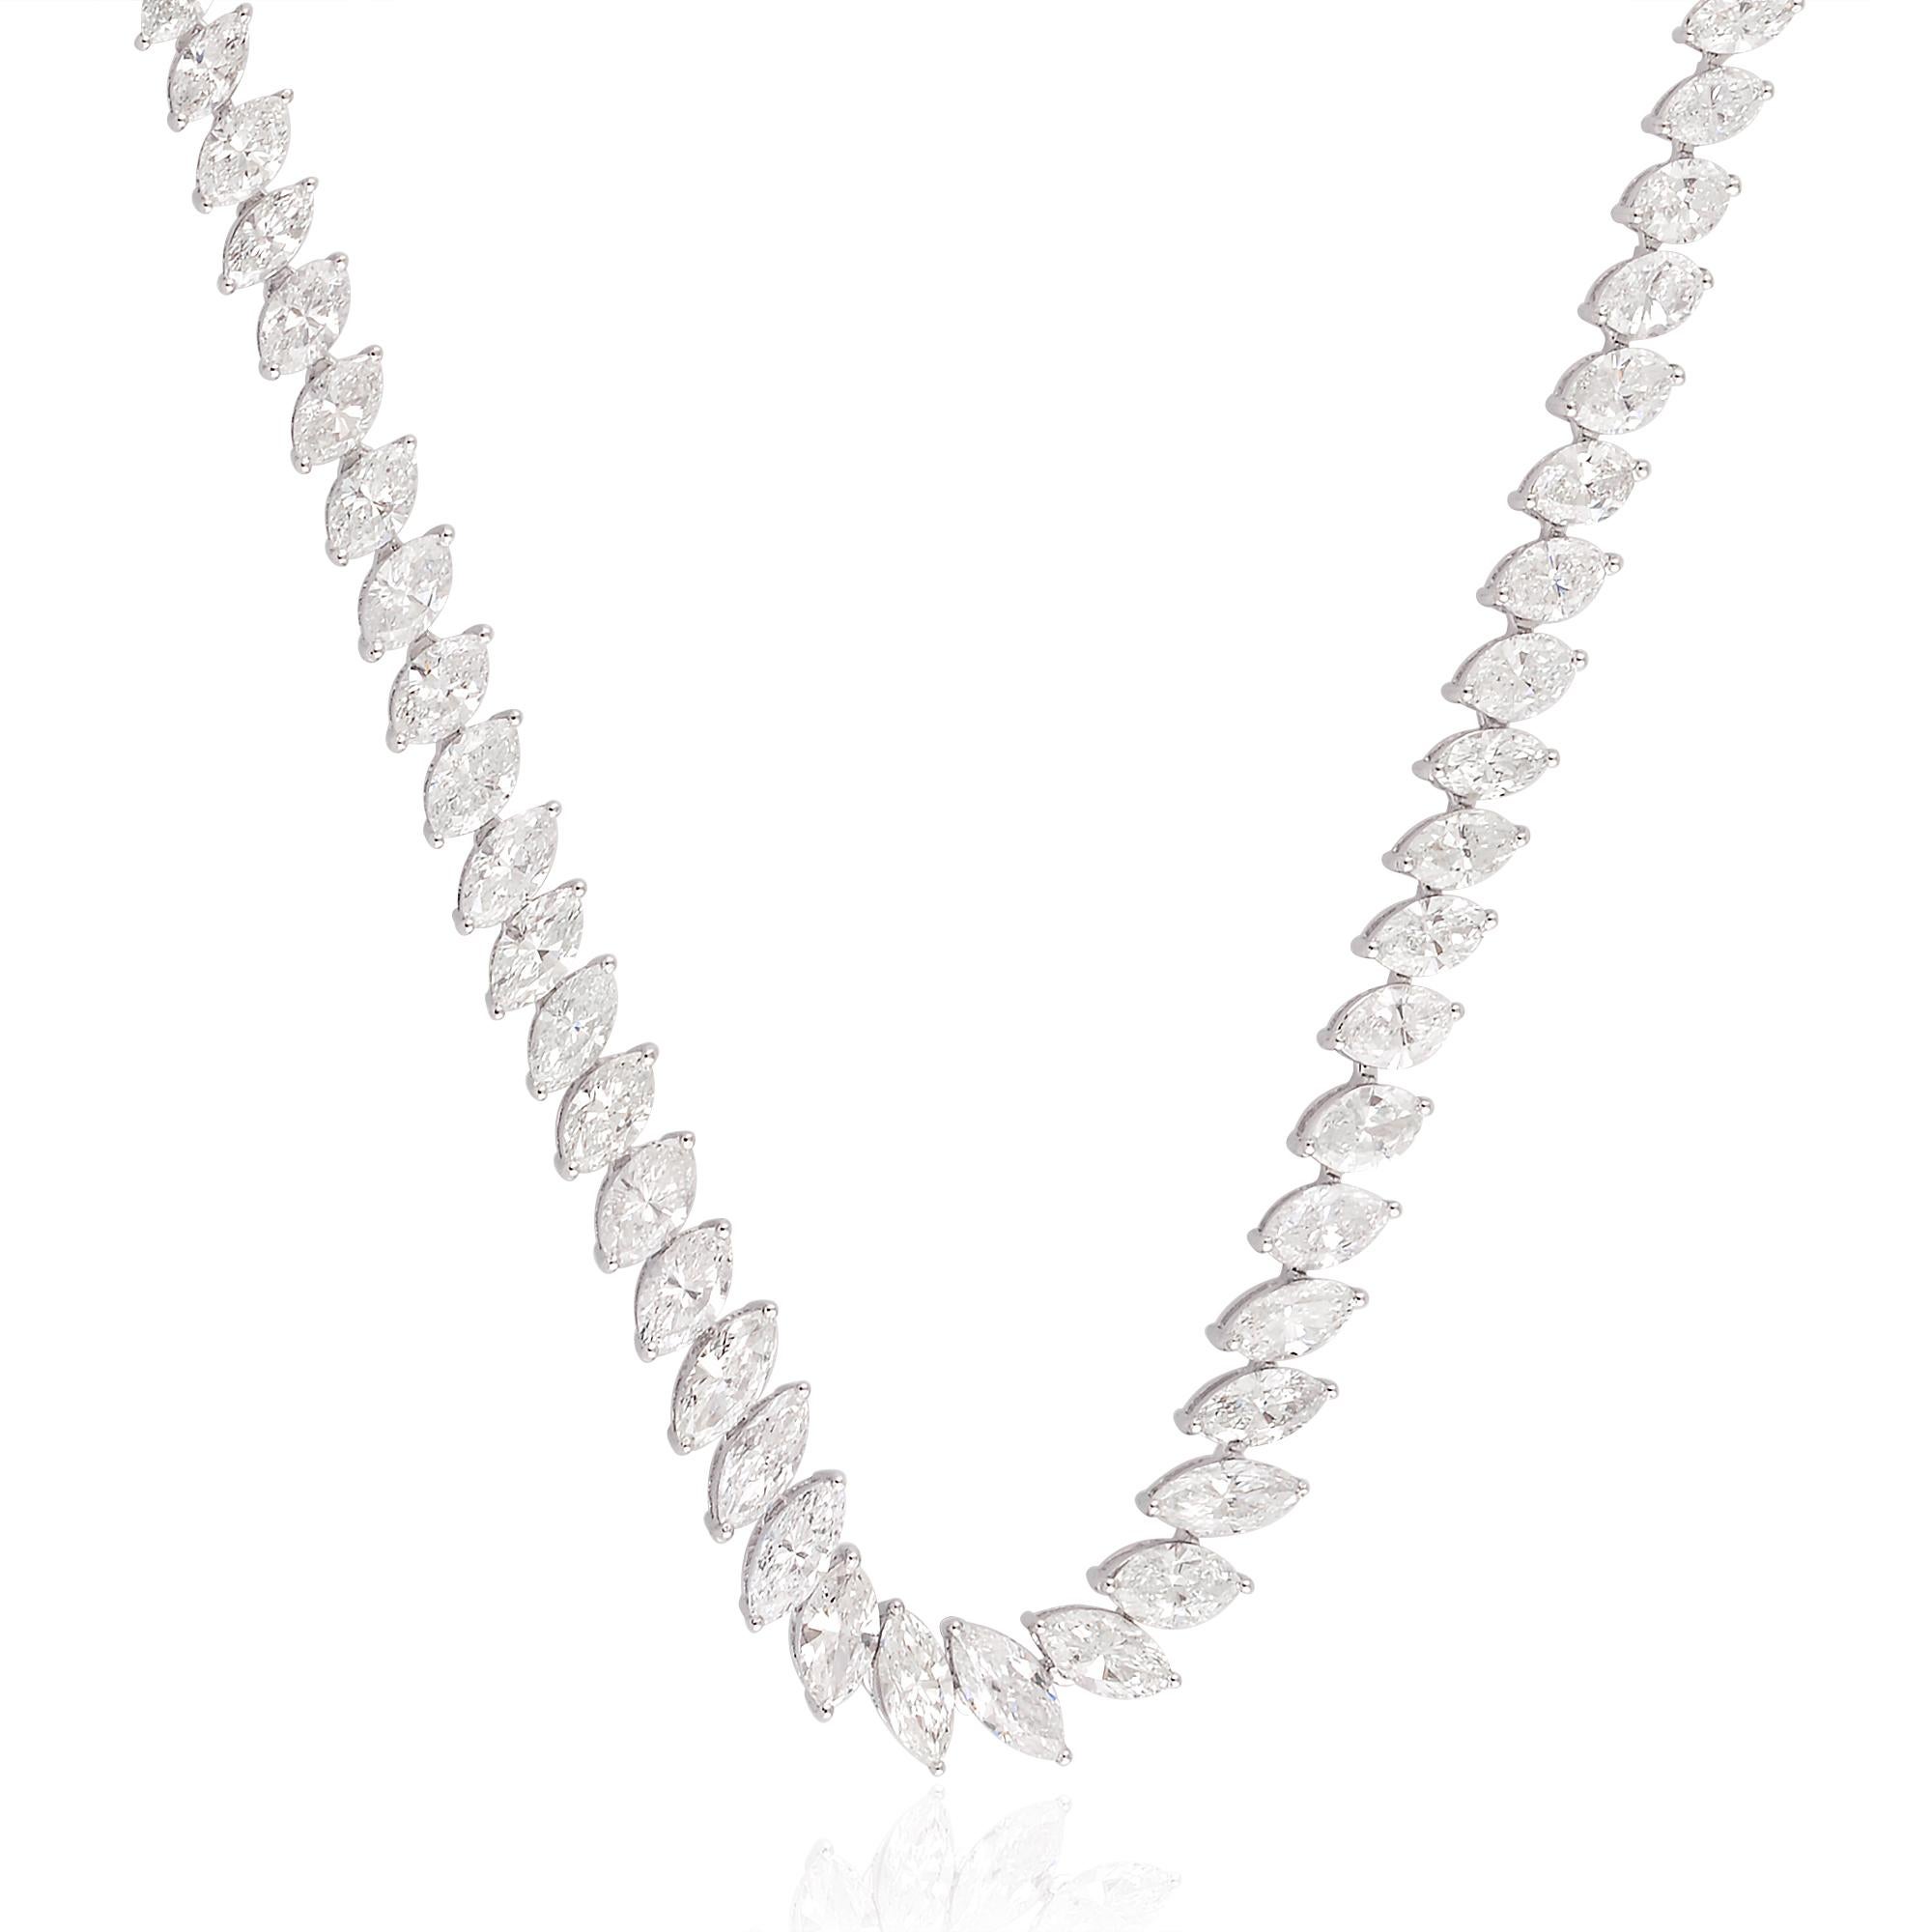 This marquise diamond necklace is a show-stopping piece that exudes luxury and refinement. It is perfect for special occasions, red carpet events, or any moment when you want to make a lasting impression. The sheer brilliance and size of the